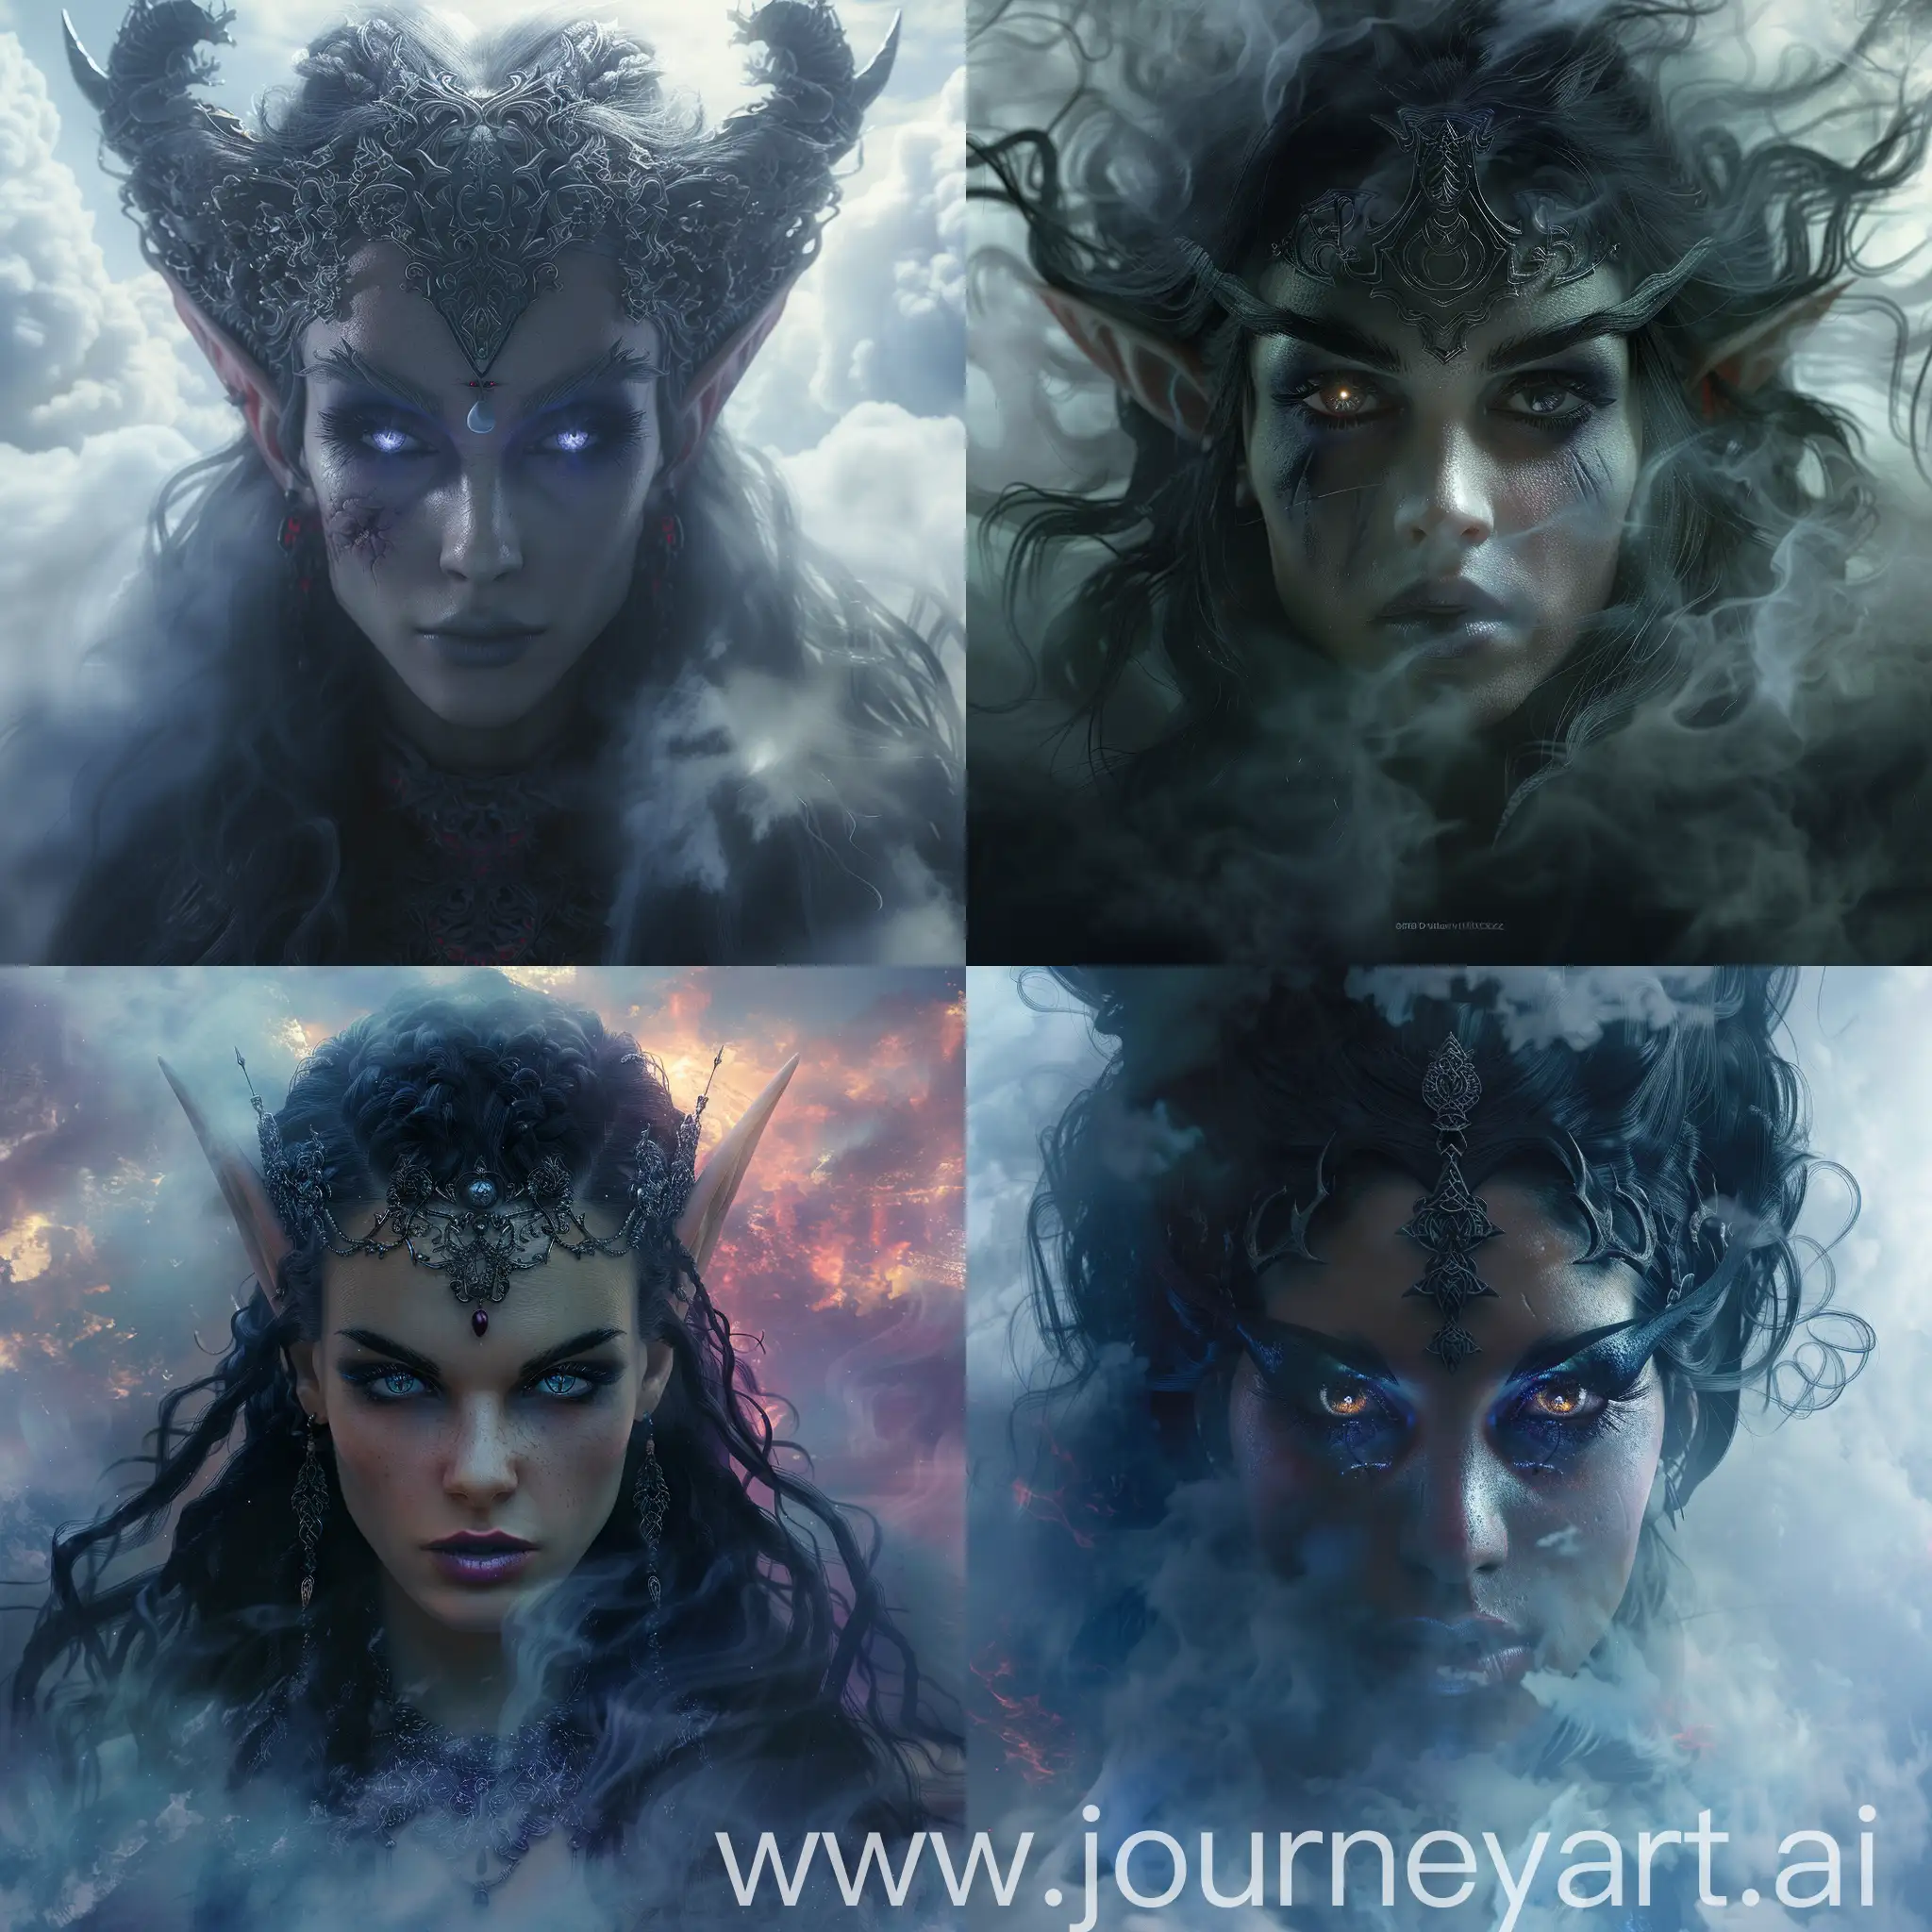 the portrait of Queen Azshara emerges as a marvelous depiction of sheer beauty, captivating all who lay eyes upon it. Every aspect, from the intricate and highly detailed elements to the polished and glorious composition, showcases the talent and skill of these renowned artists. The astonishing use of dark colors by Alasdair McLellan, along with the digital paintings by Daniel Merriam, Peter Gric, and Dariusz Klimcza, enhances the artwork with hair backlighting, volumetric lighting, and a breathtaking display of 8K resolution. The perfection of Queen Azshara's eyes, boasting flawless pupils and an undeniable expressiveness, is showcased amidst a backdrop of mist, fog, and clouds that add an ethereal touch. The ultra-high definition (UHD) imagery offers unrivaled vibrancy with vivid colors and an extraordinary level of detail that leaves one awe-inspired. This UHD drawing, a true work of art, stands as a testament to its beautiful and intricate design, intricately rendered through the Octane Render process. With its astounding level of detail and trendsetting presence on ArtStation, this oeuvre seamlessly blends artistic photography with photorealistic concept art, evoking a volumetric cinematic experience like no other.